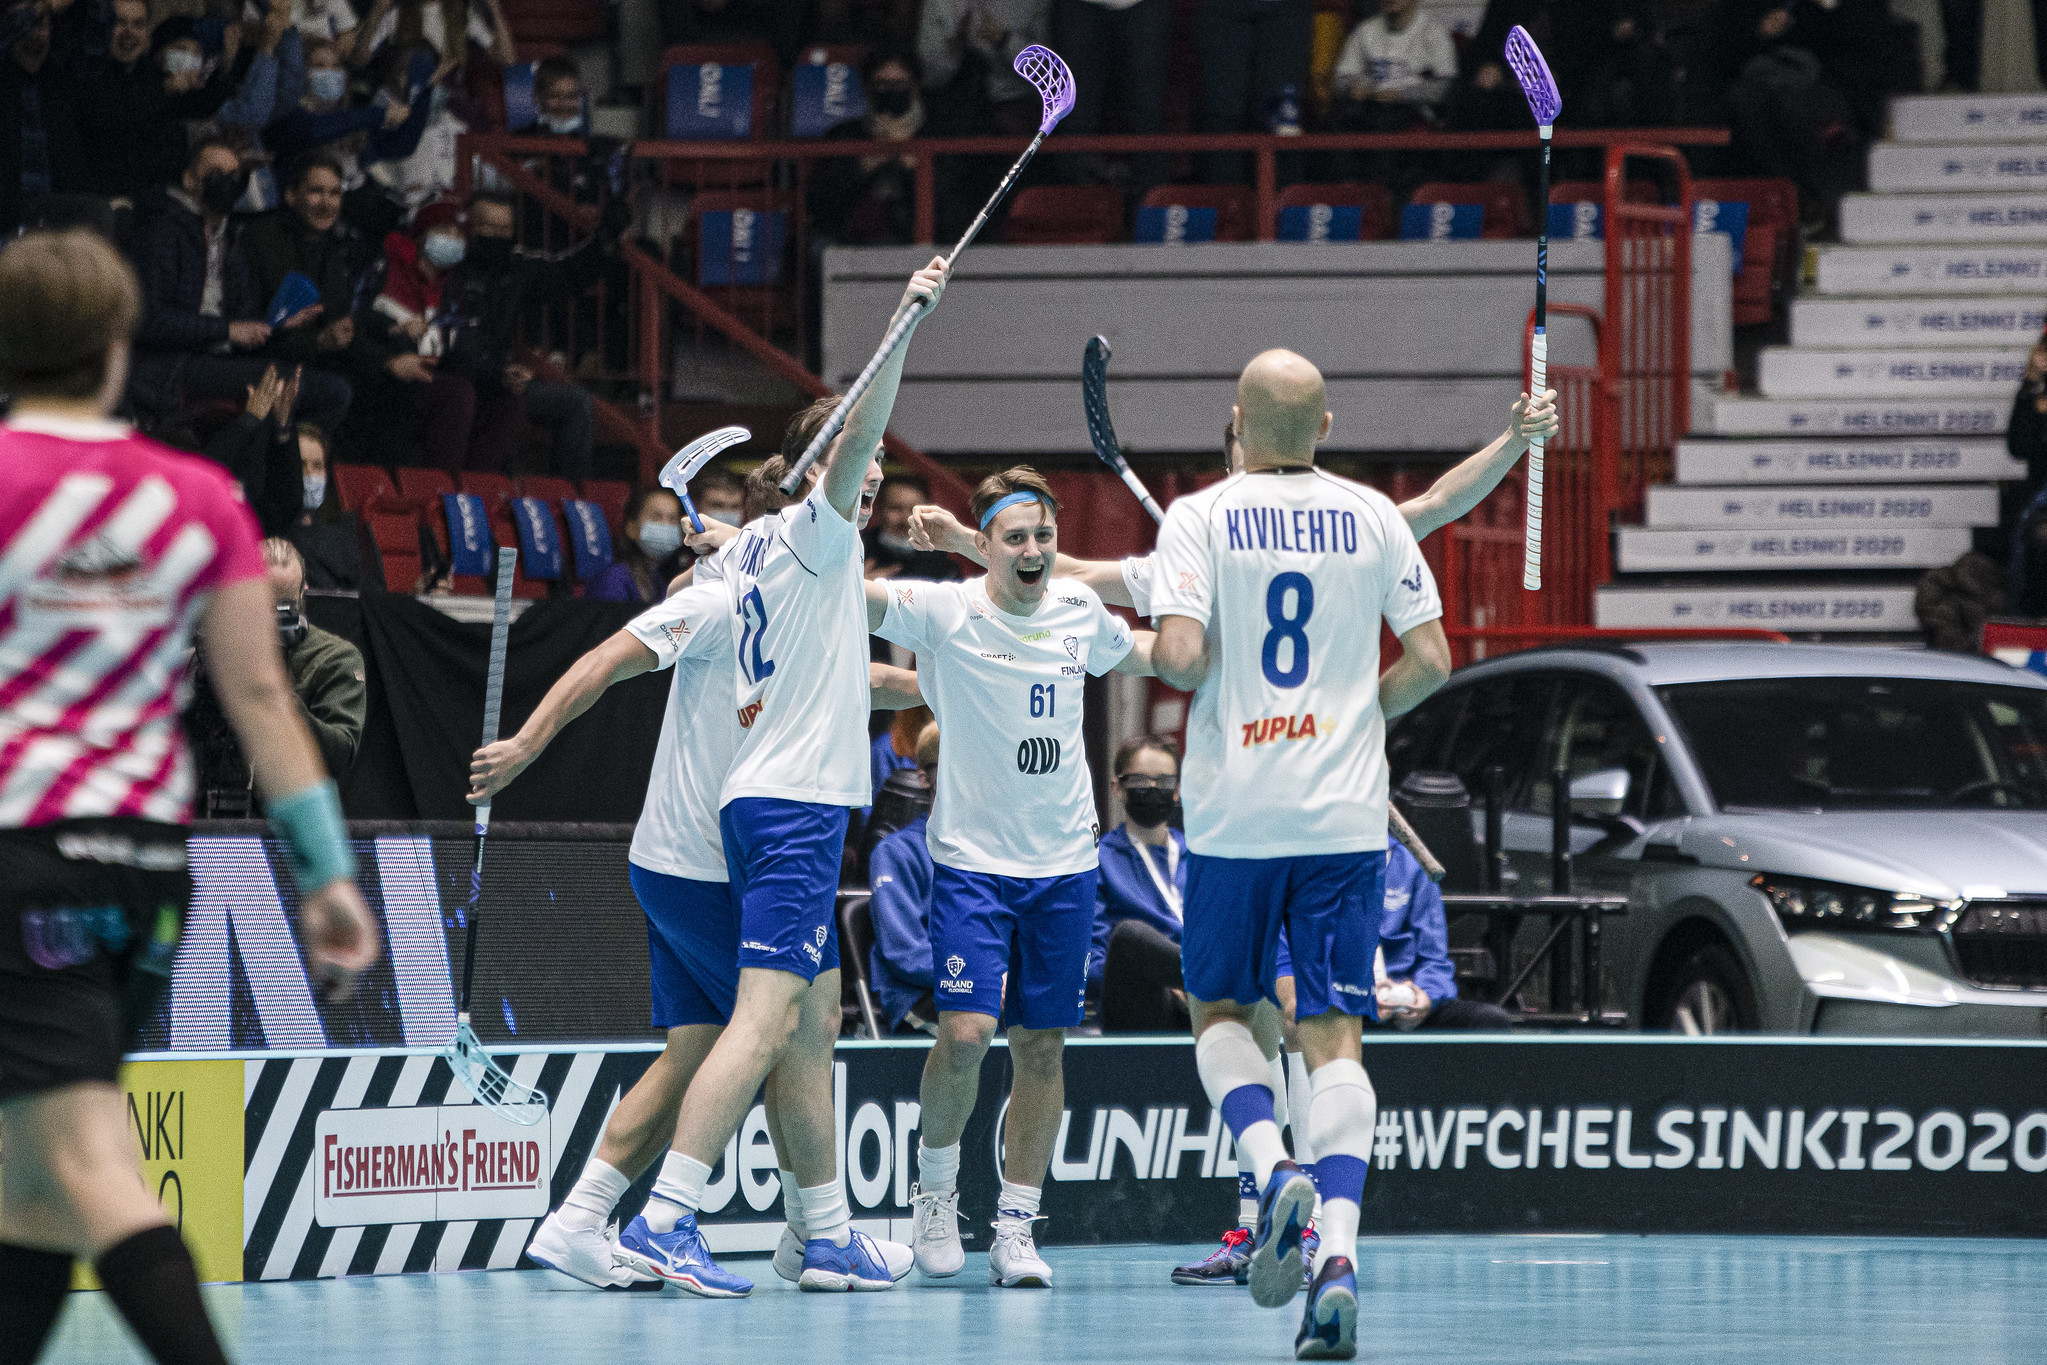 Finland beat rivals Sweden in group stage encounter at Men's World Floorball Championship